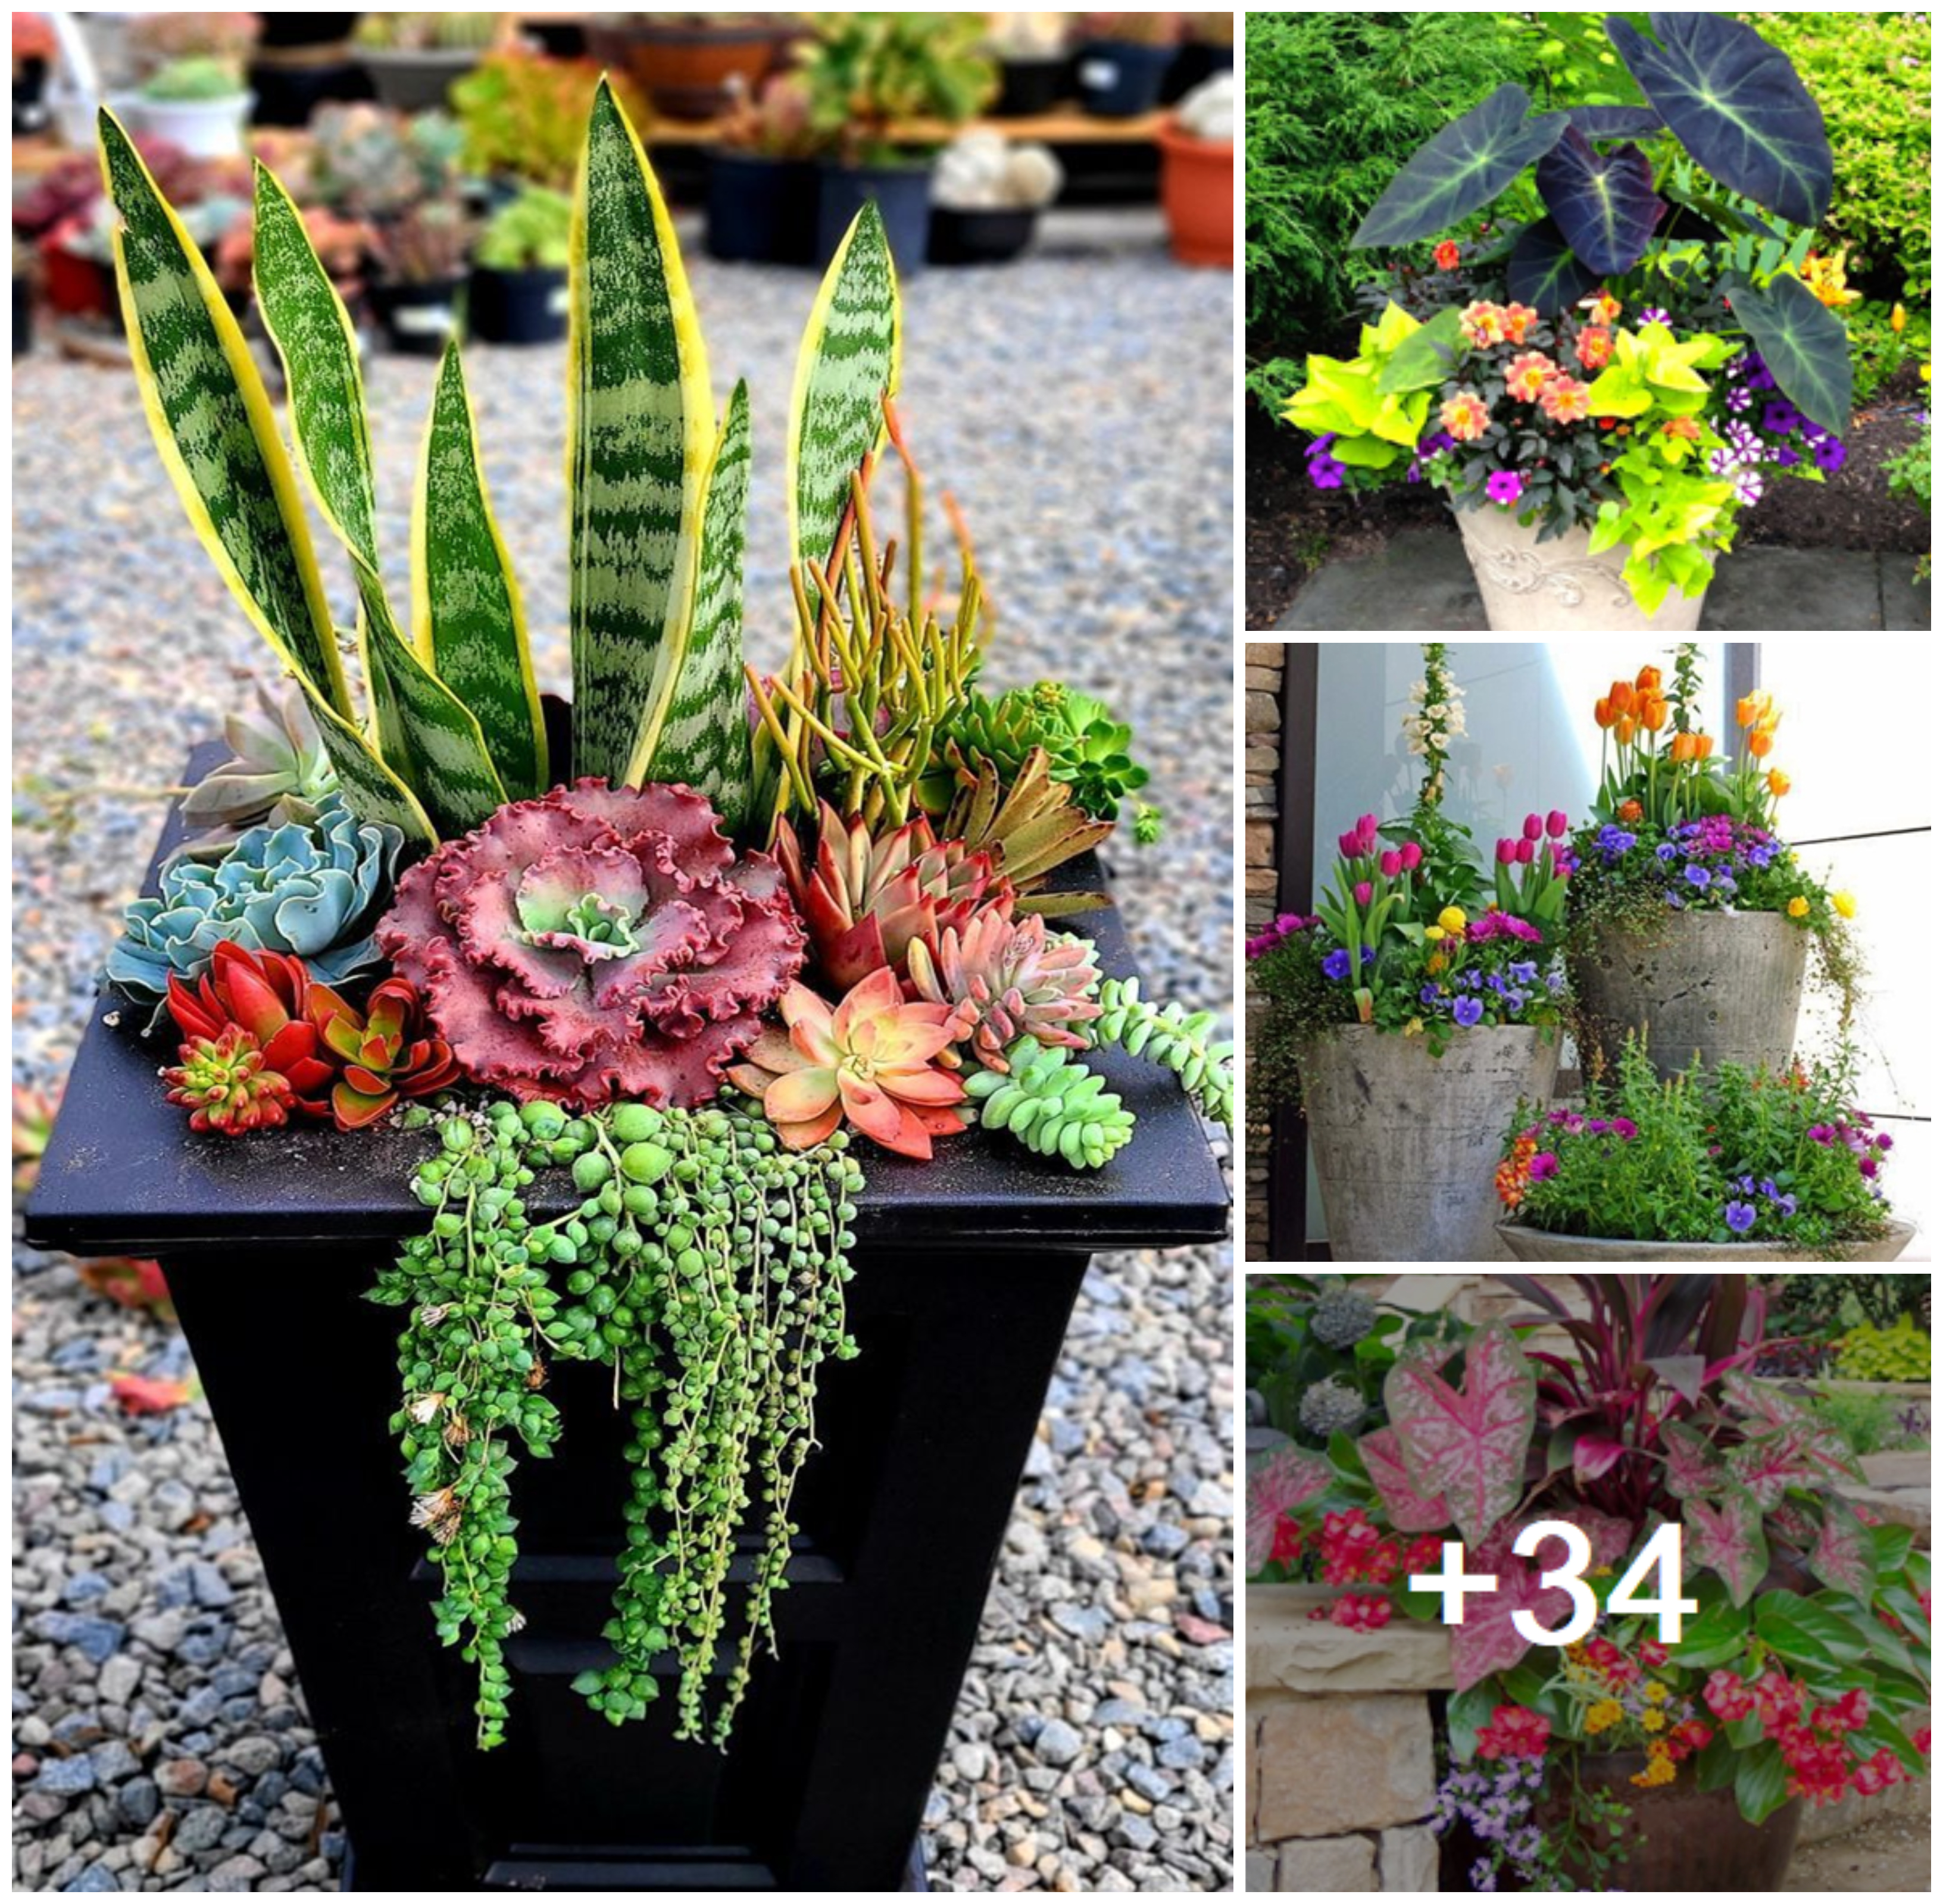 How to Build a Charming Planter in Home